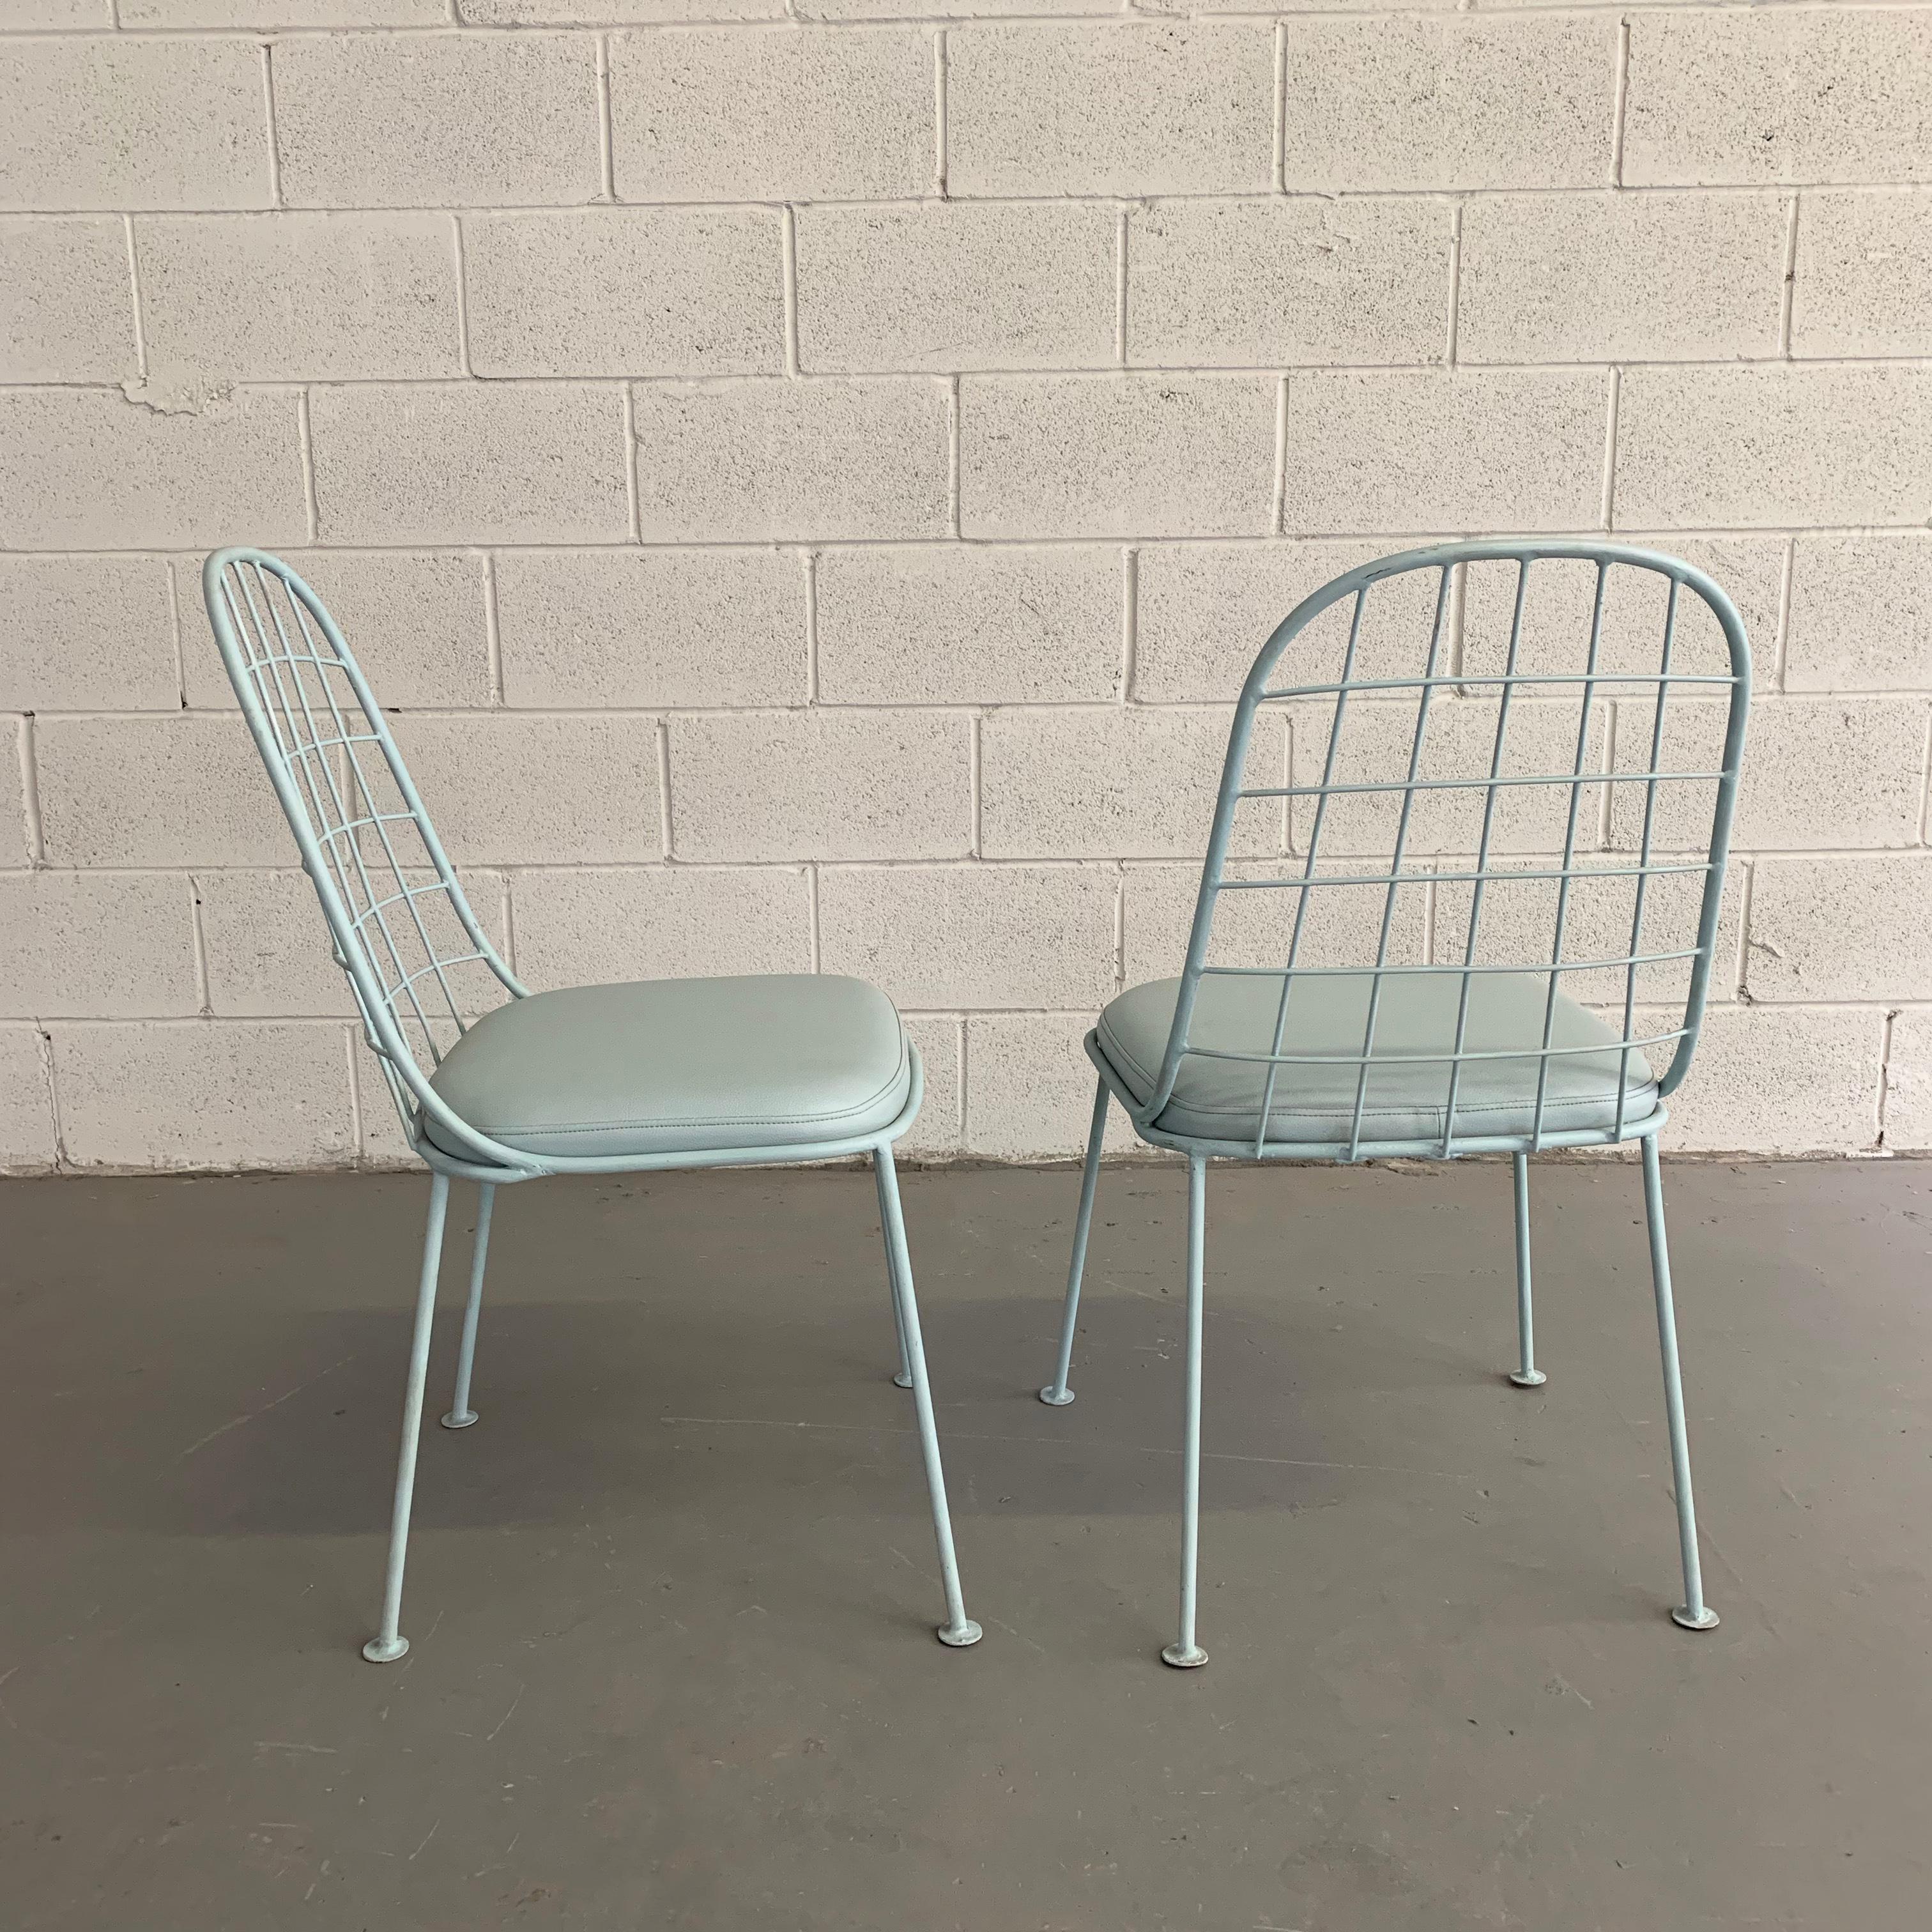 20th Century Pair of Mid-Century Modern Painted Wrought Iron Outdoor Patio Chairs For Sale